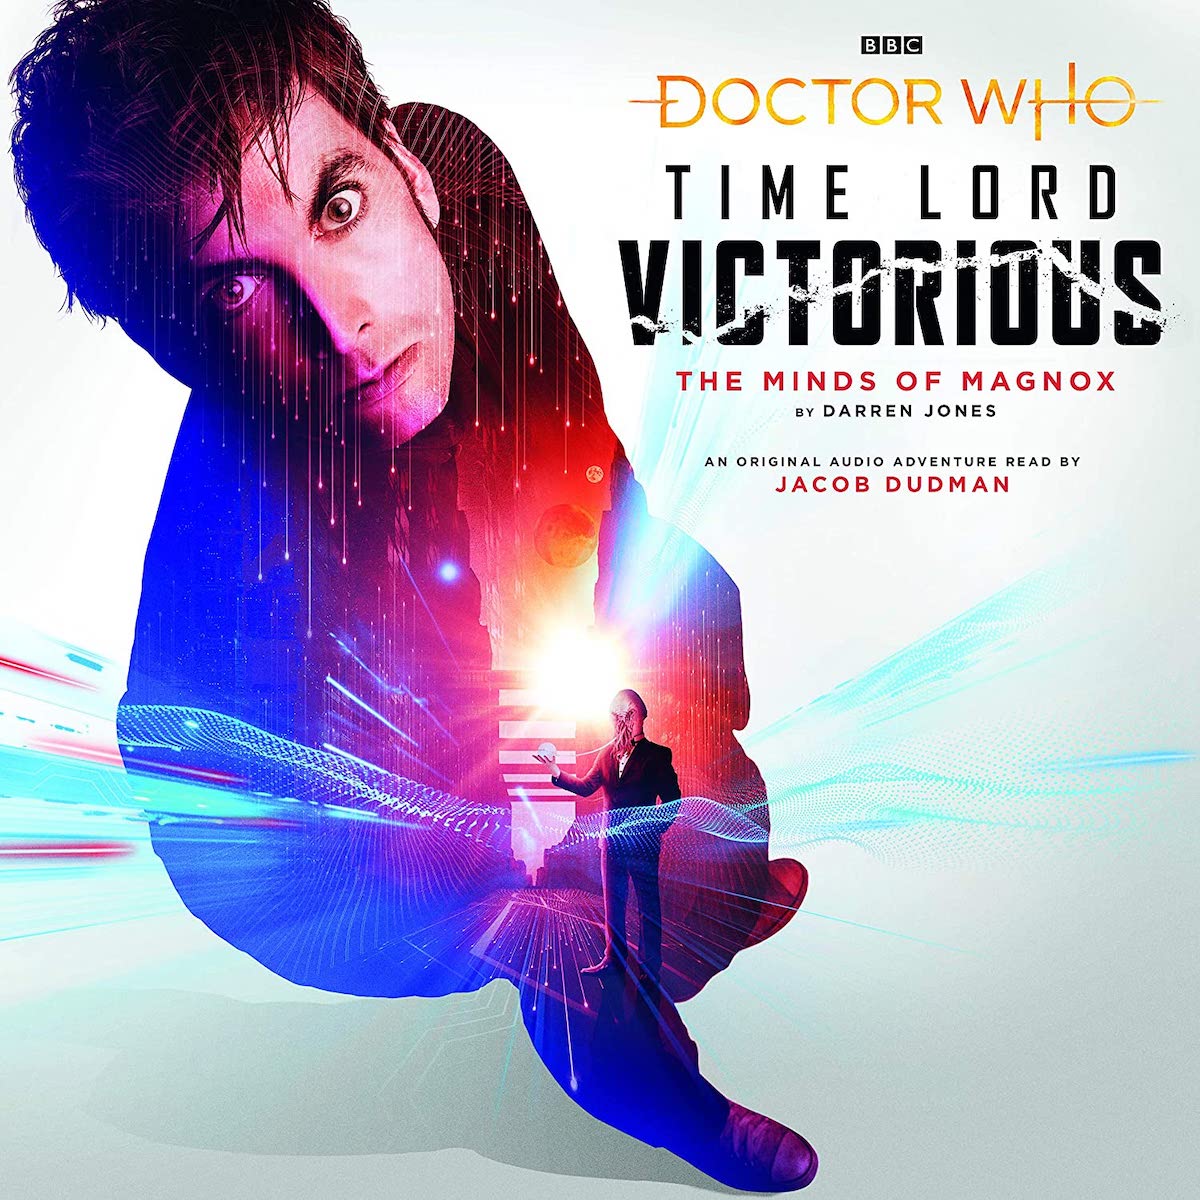 Time Lord Victorious: The Minds of Magnox